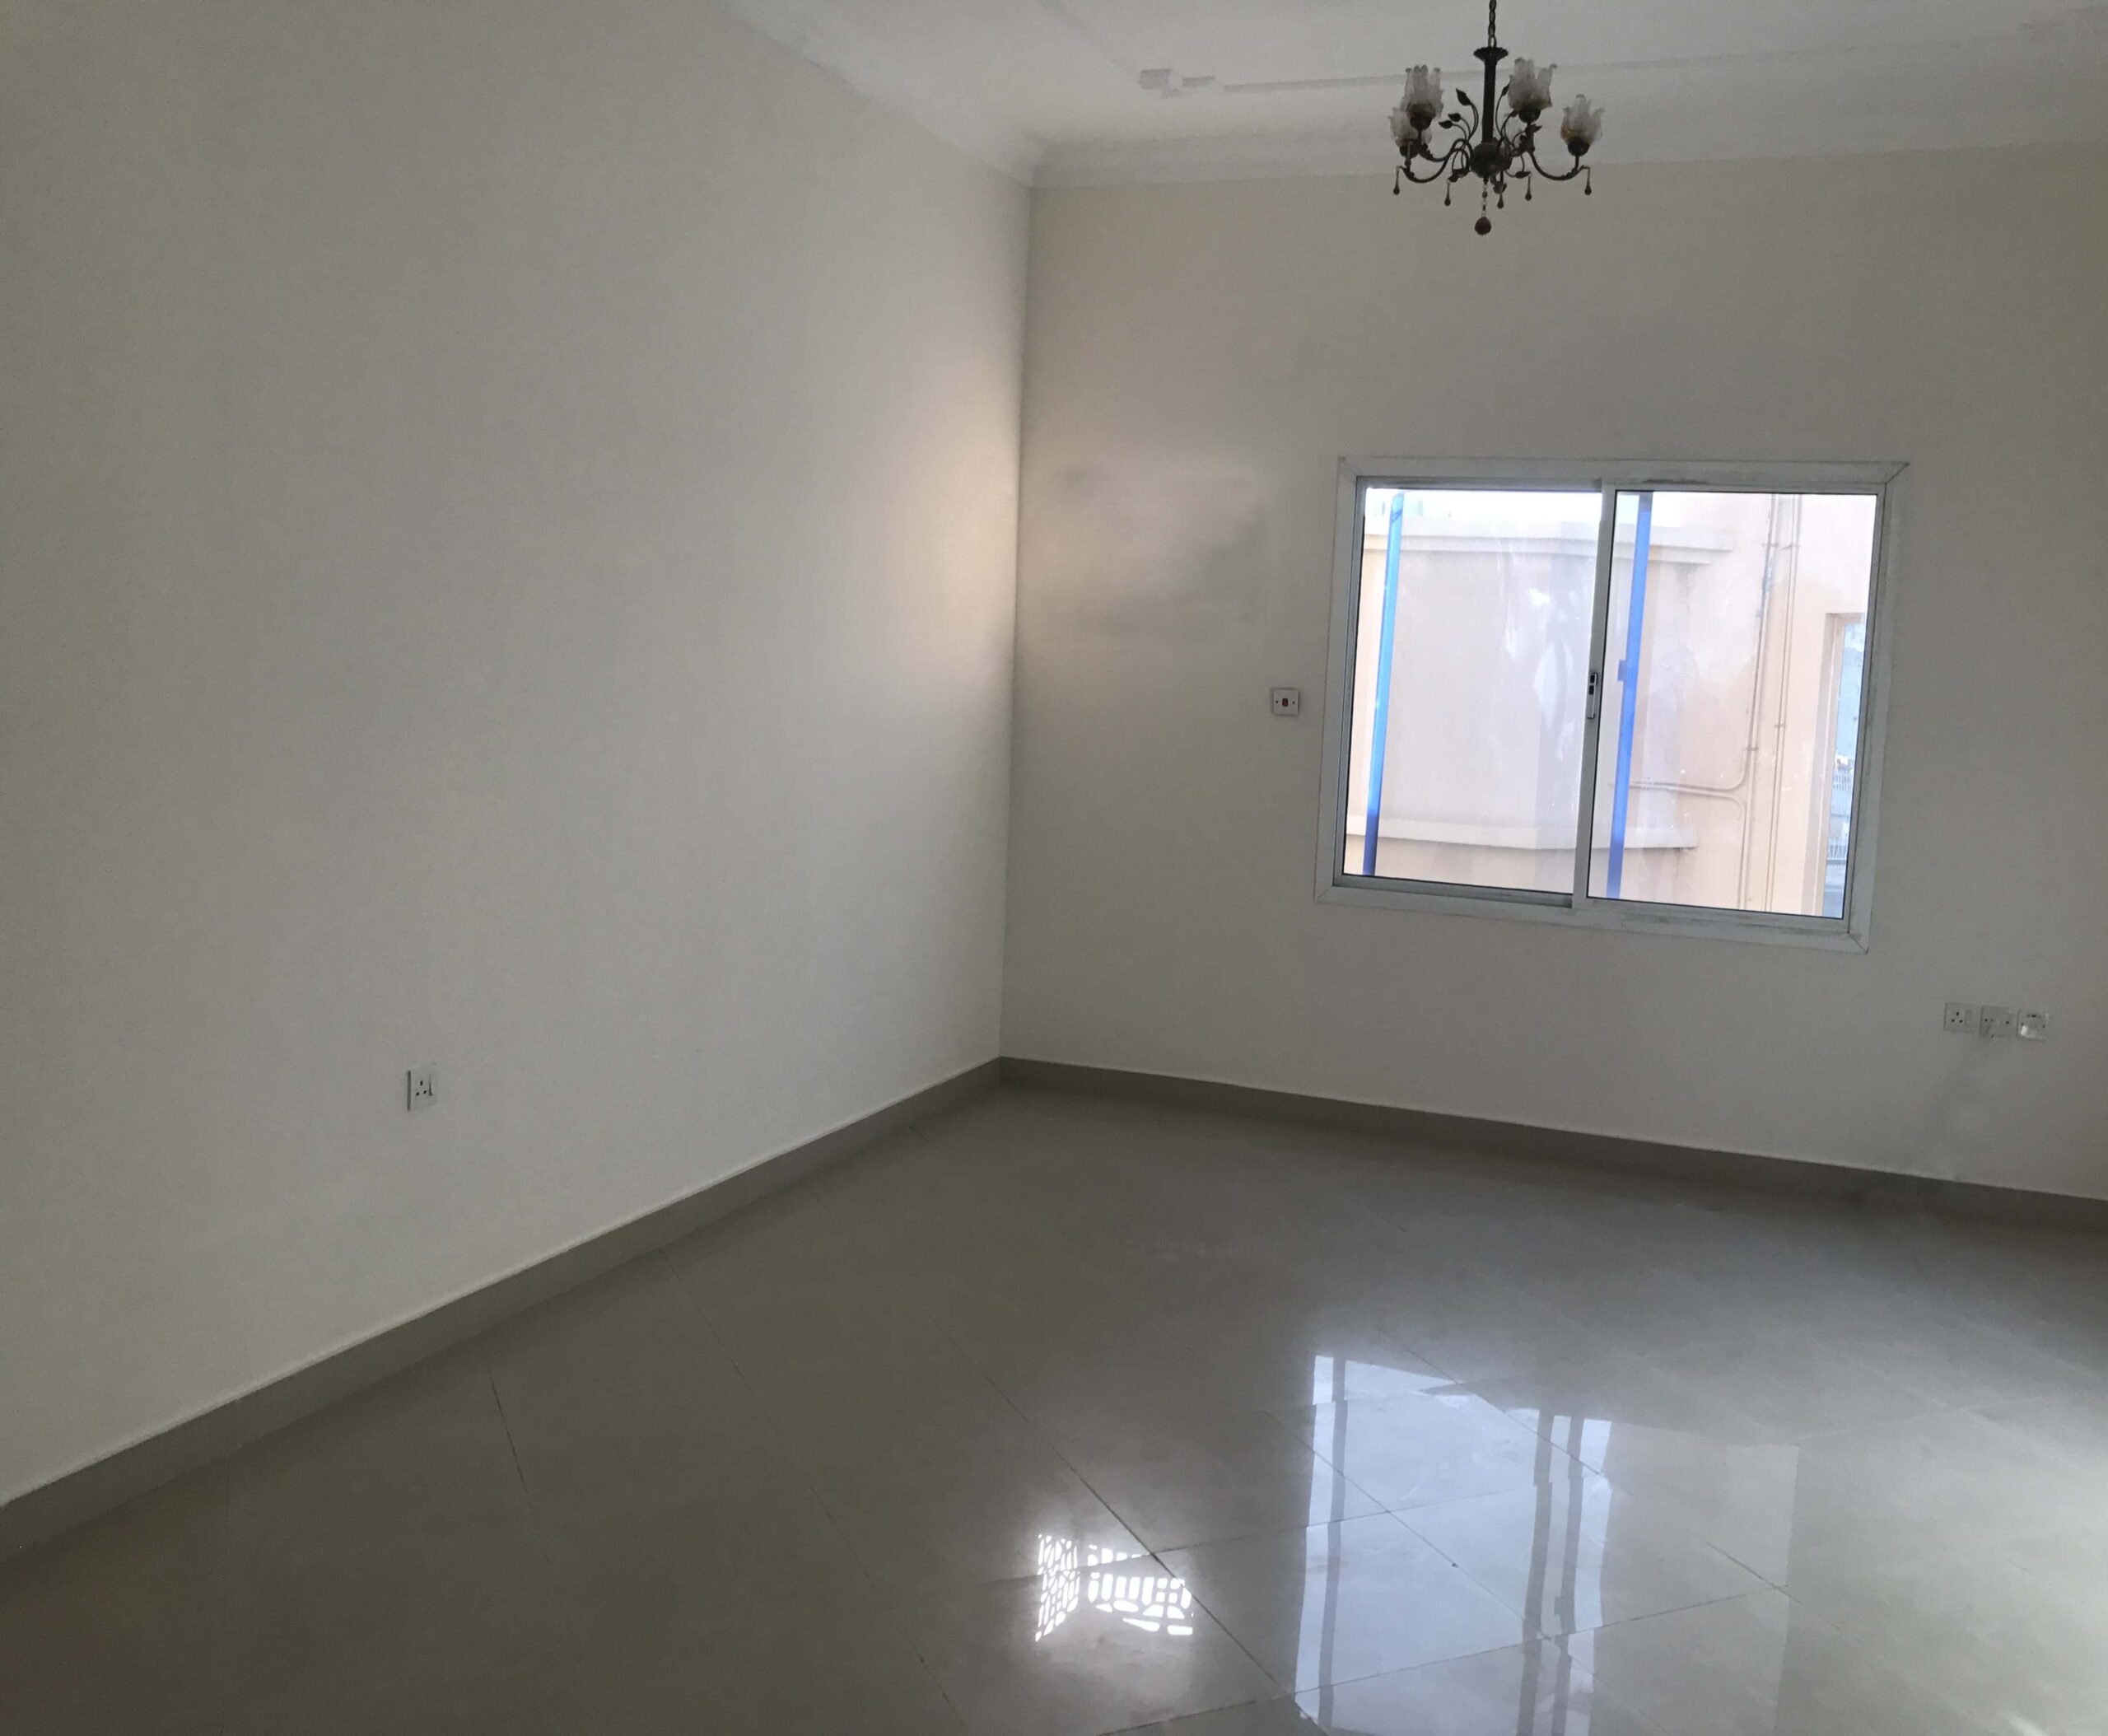 Flat for rent in Isa Town close to Gulf University offered for BD 250 /- per month